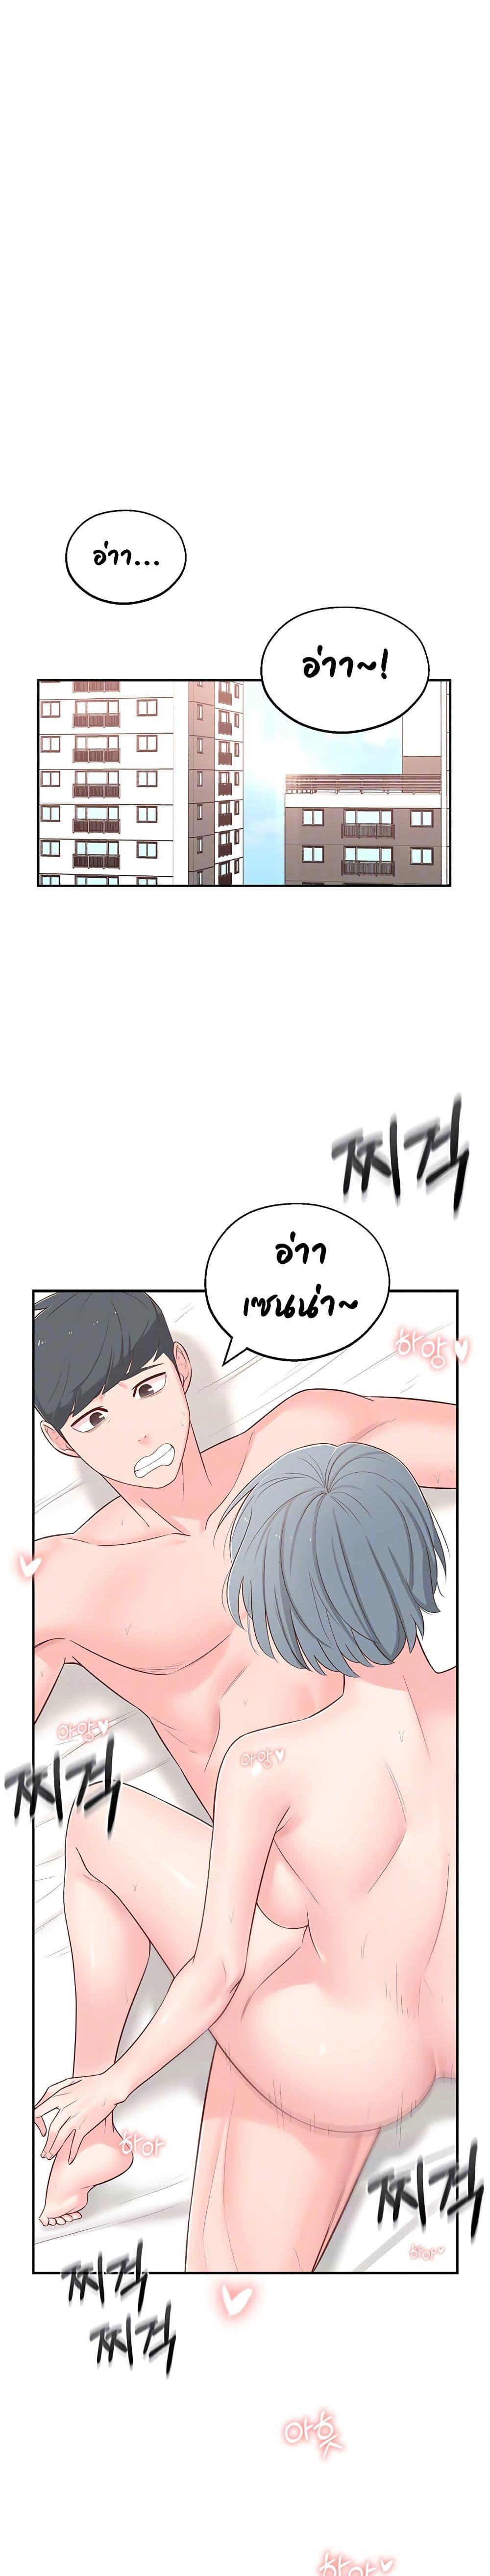 A Knowing Sister 5 ภาพ 3